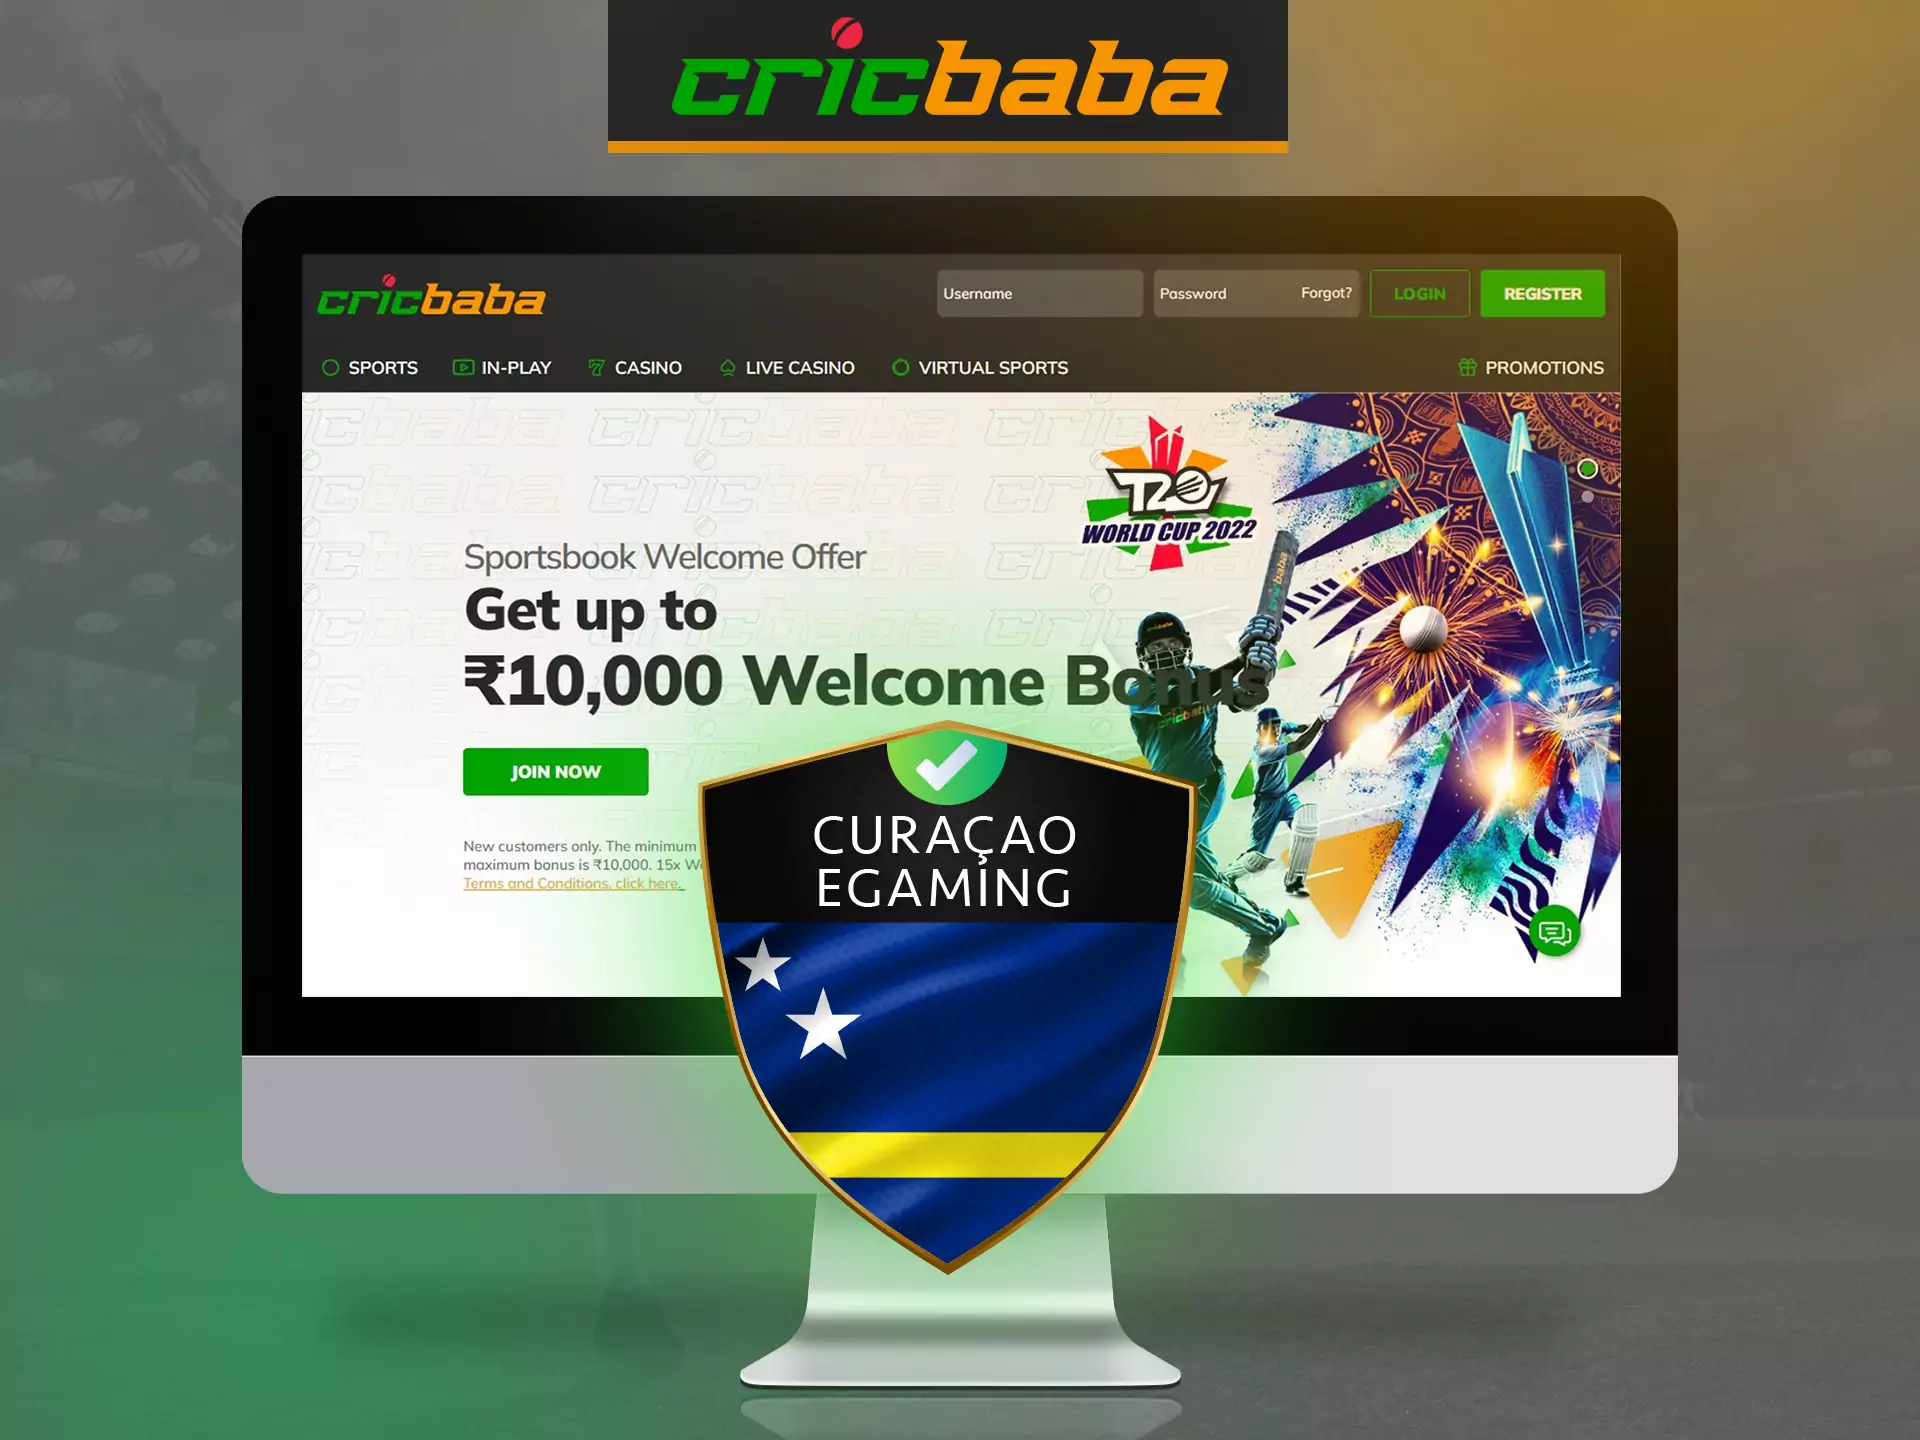 Cricbaba is legal and safe for players.